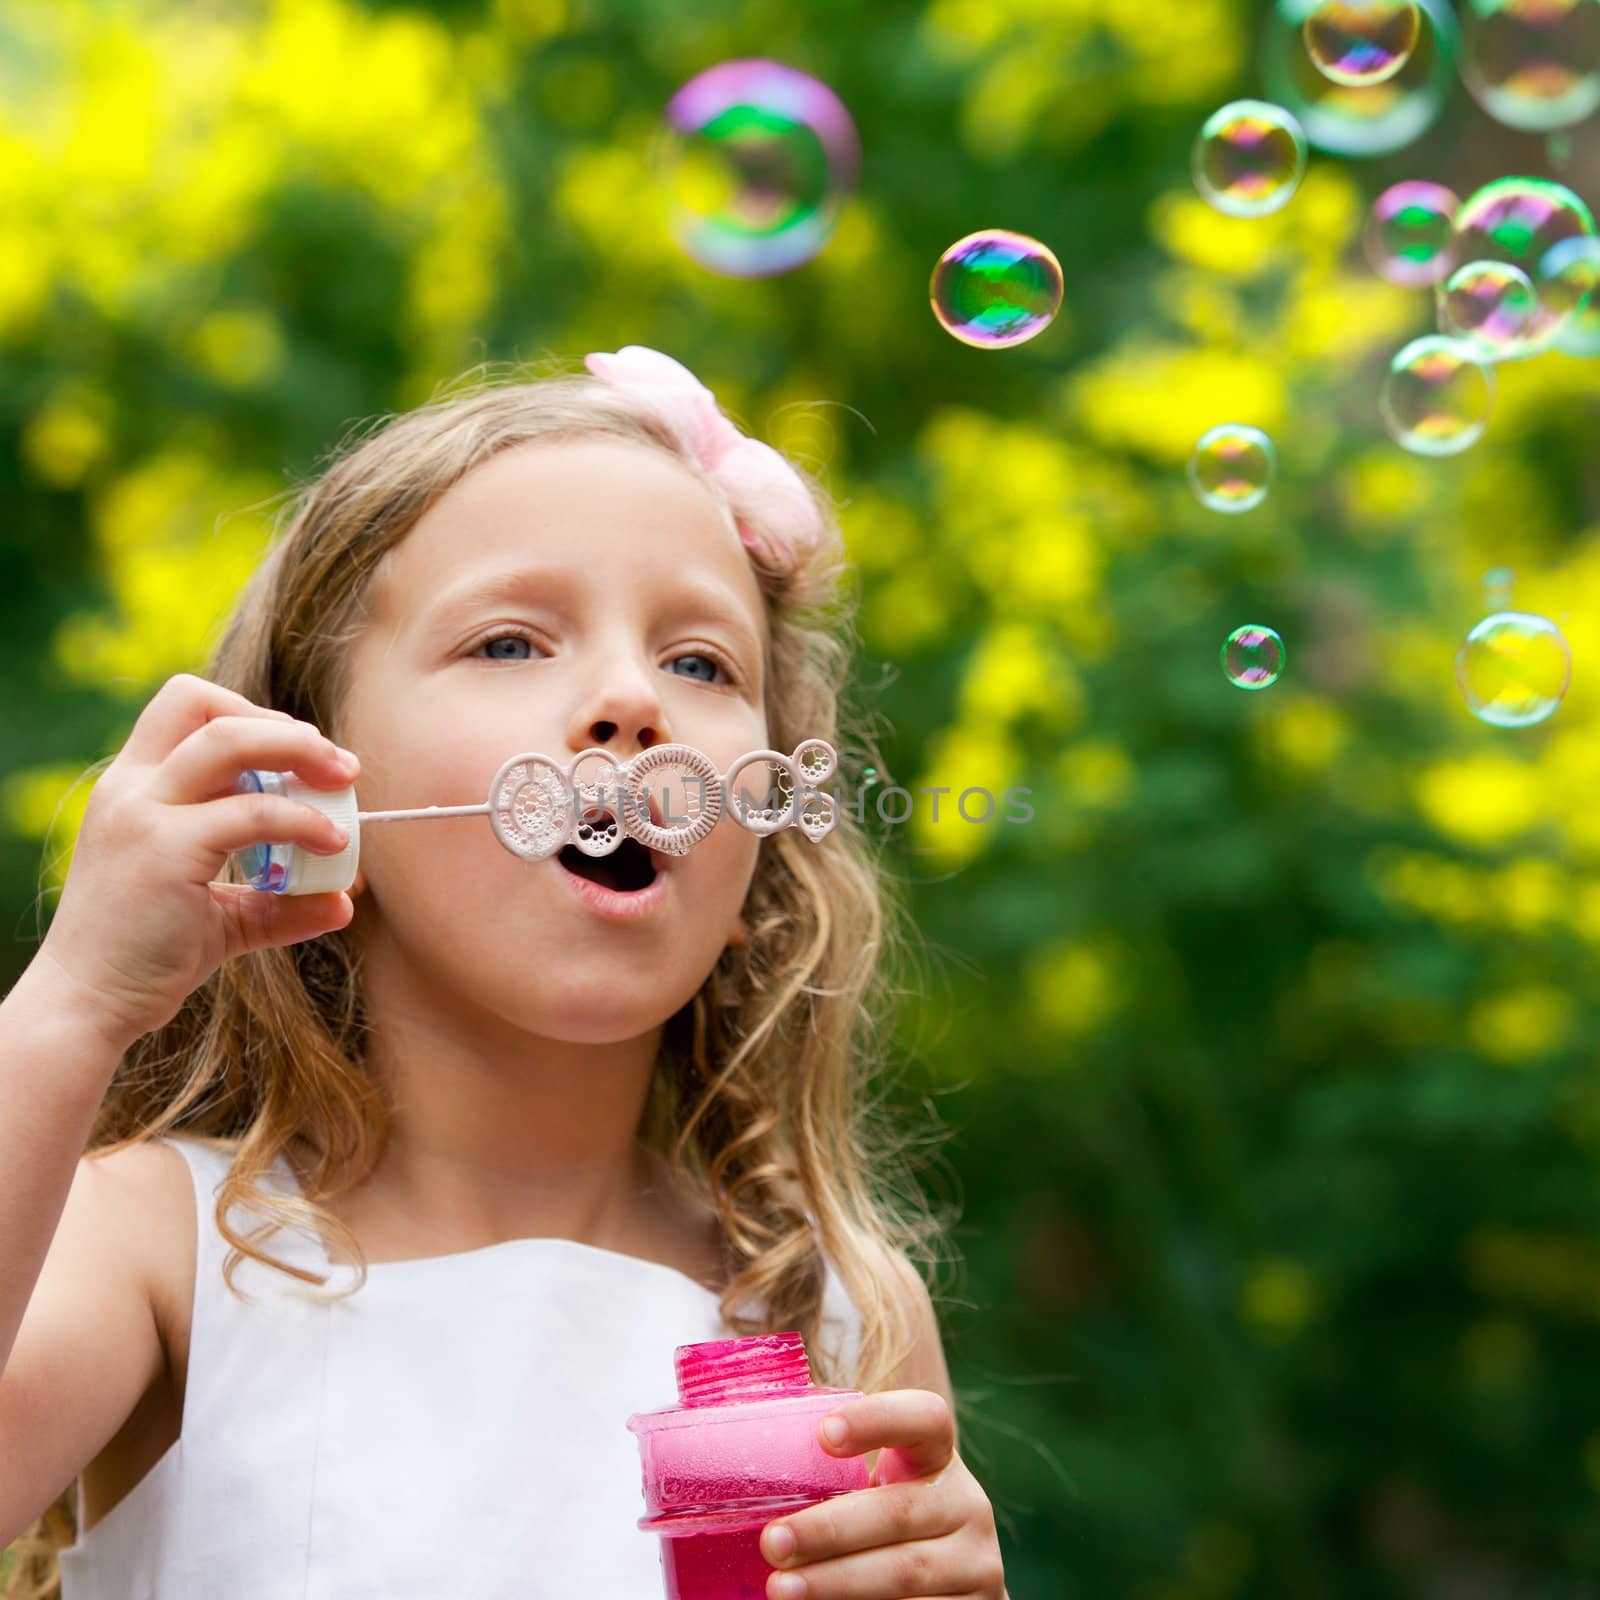 Cute girl blowing bubbles oudoors. by karelnoppe